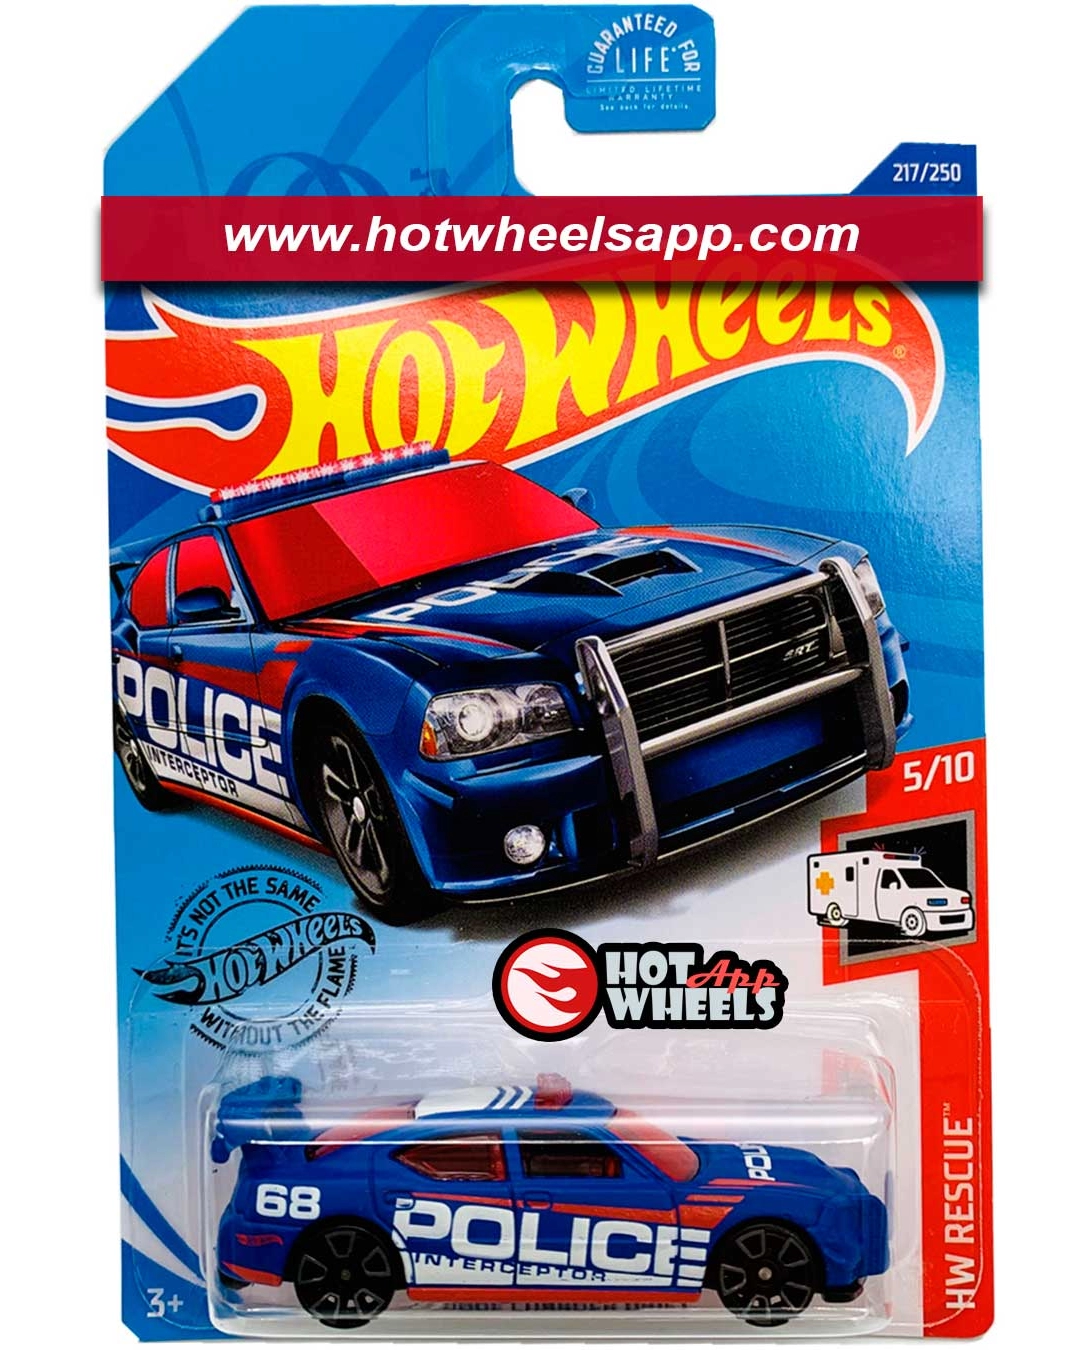 Hot Wheels POLICE - HW Rescue 5/10-217/250 DODGE CHARGER DRIFT 2020 